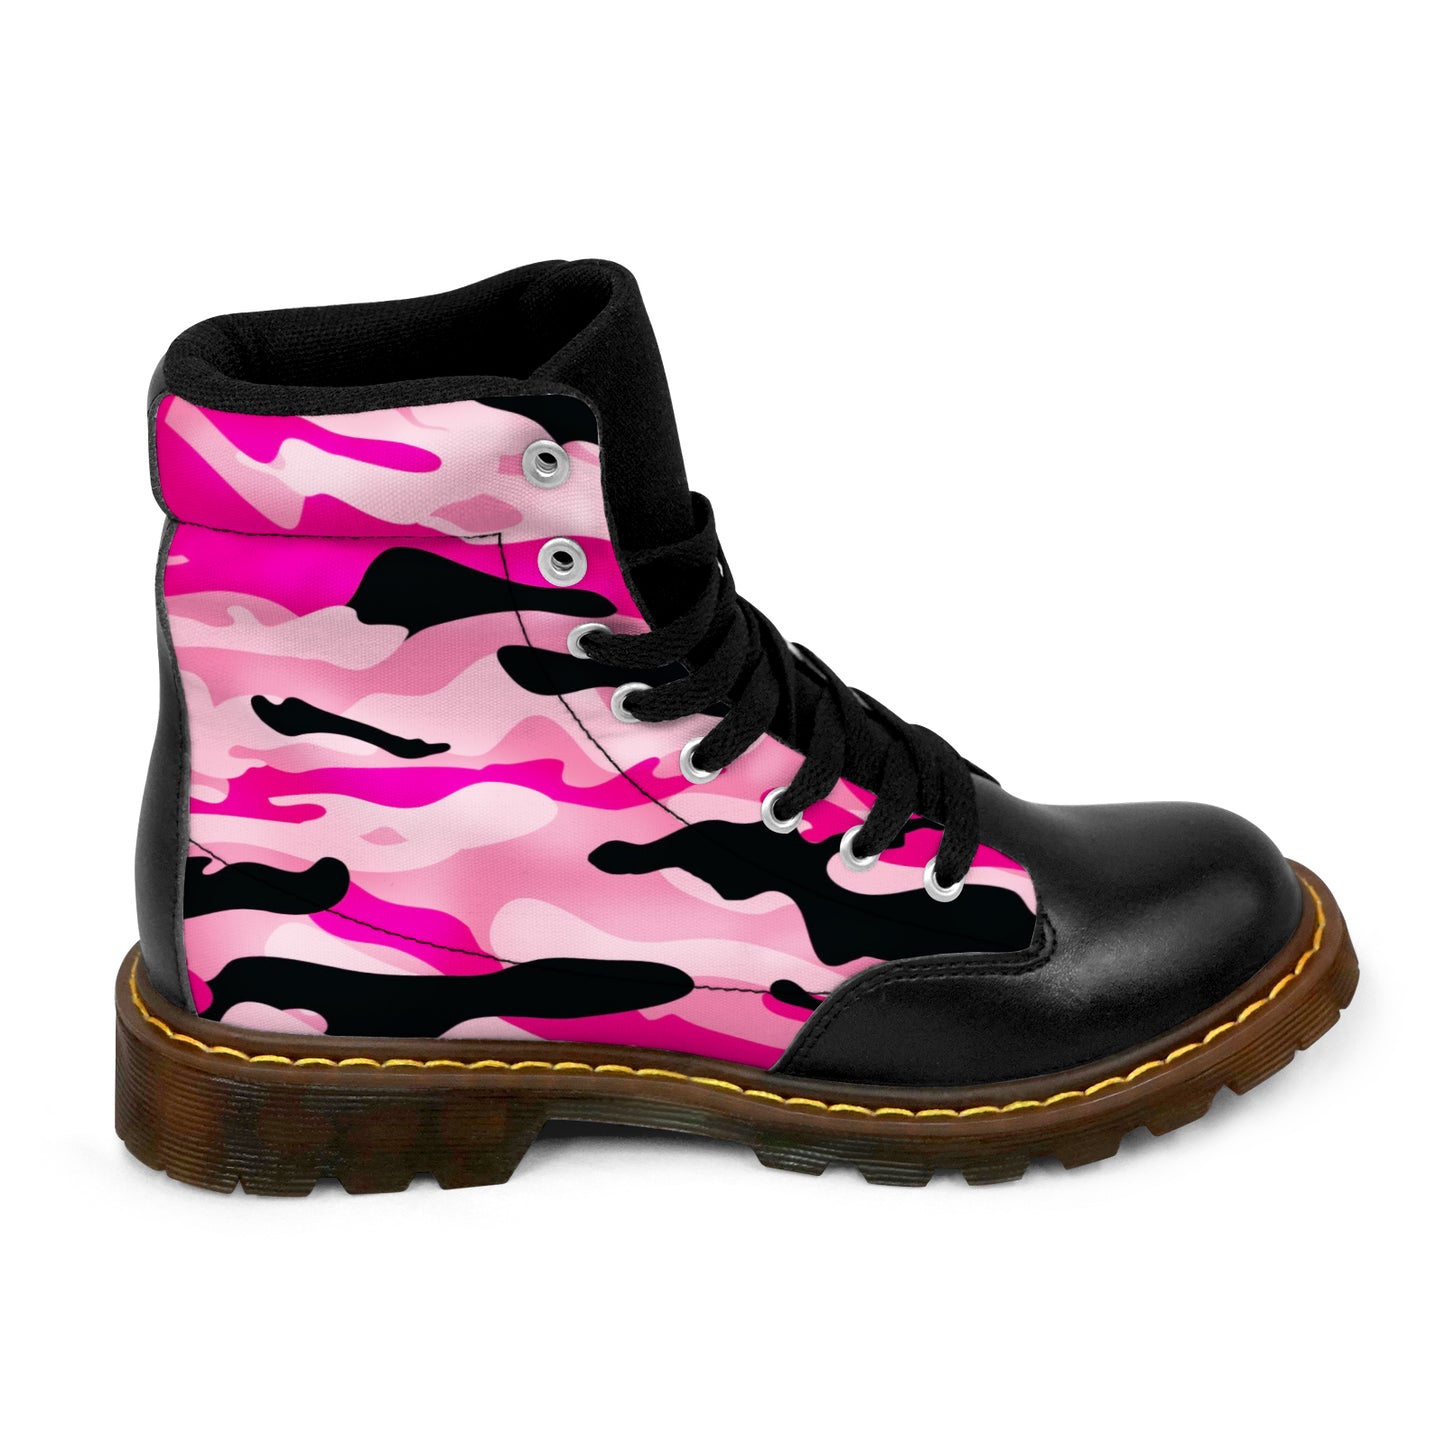 Winter Round Toe Women's Boots - Pink Camouflage